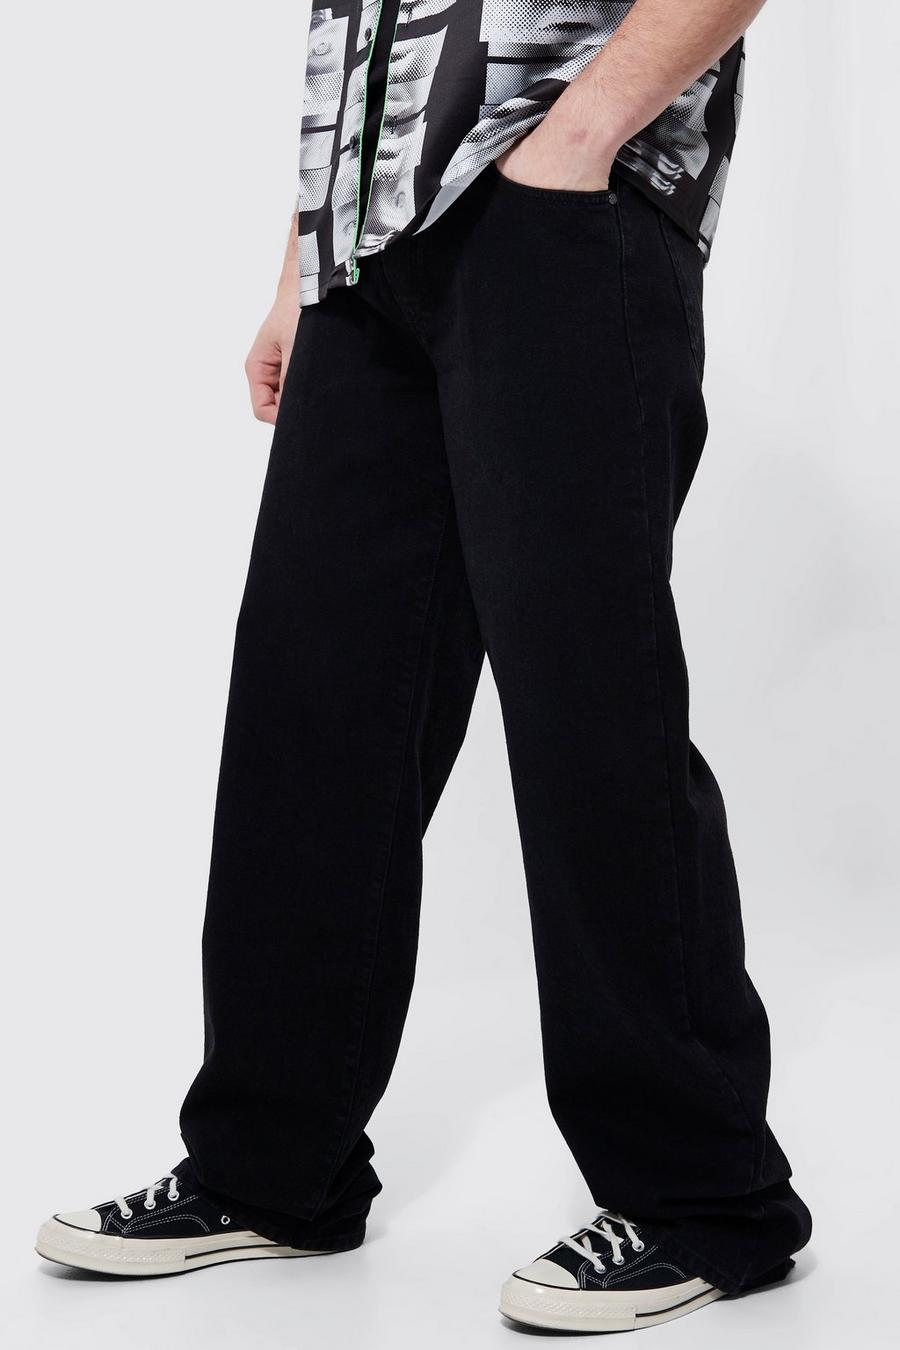 Washed black Tall Baggy Fit Drawstring Jeans   